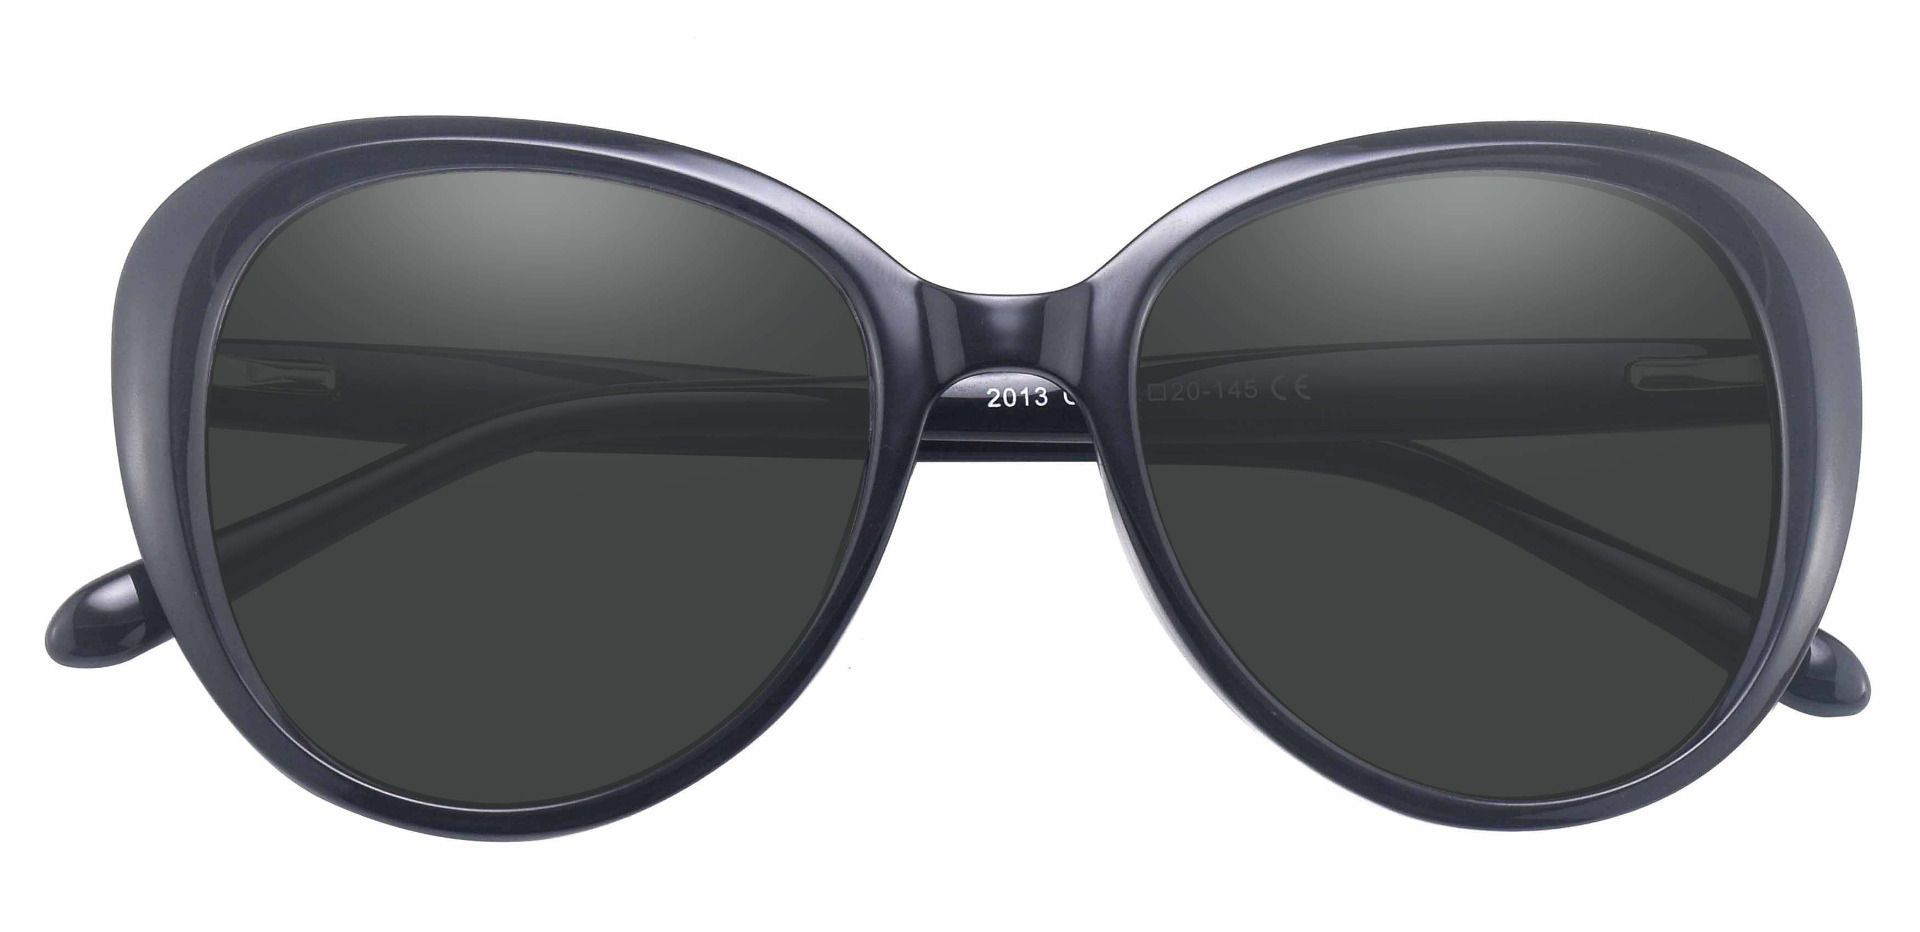 Sheridan Oval Non-Rx Sunglasses - Black Frame With Gray Lenses